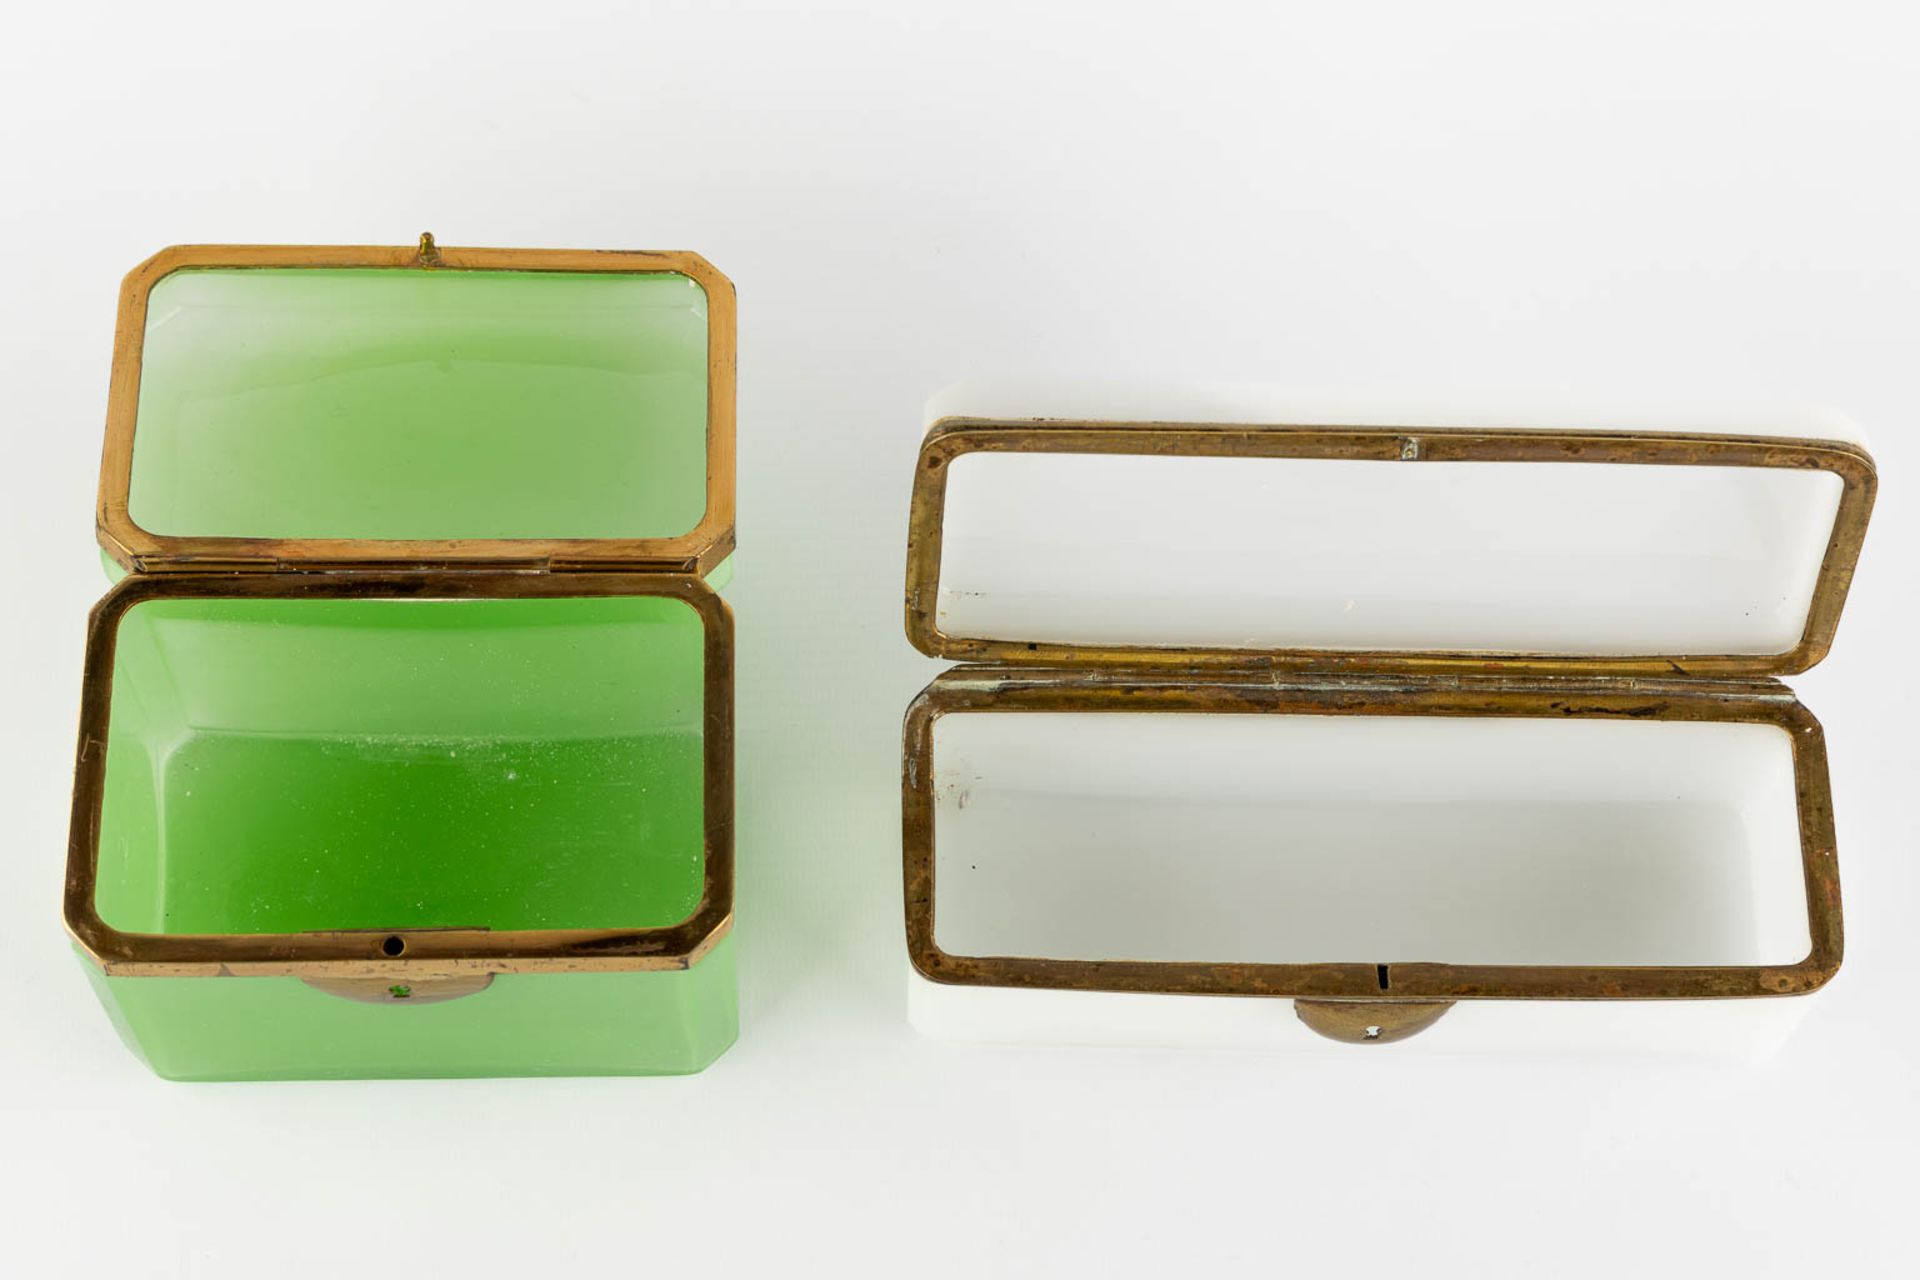 Two Opaline glass boxes with brass hardware. (L:9 x W:13,5 x H:10 cm) - Image 7 of 11